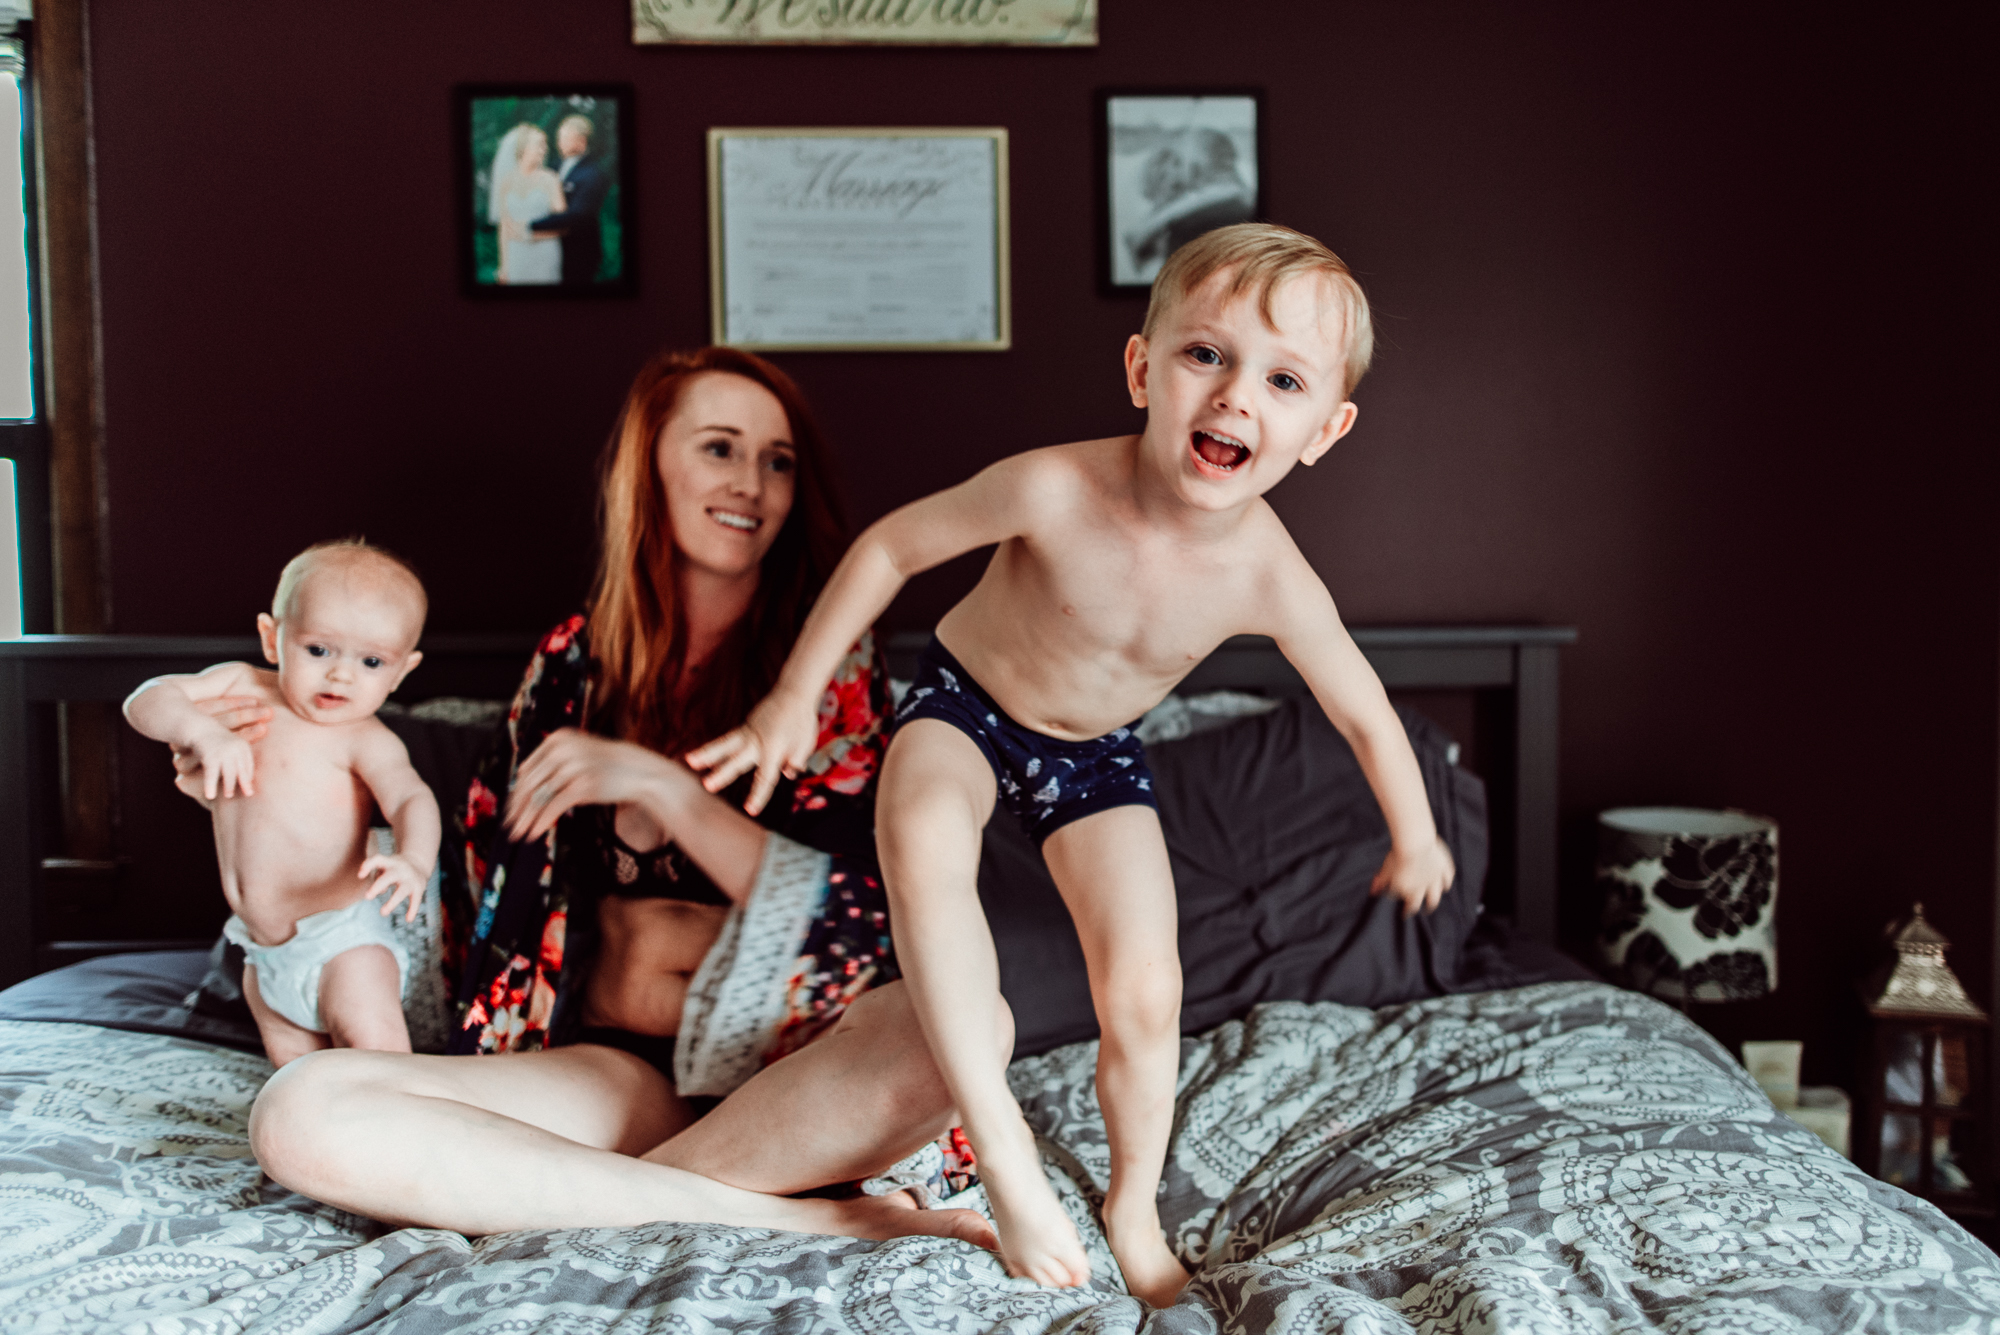 Minneapolis Postpartum Photography by Meredith Westin-May 14, 2019-131522.jpg